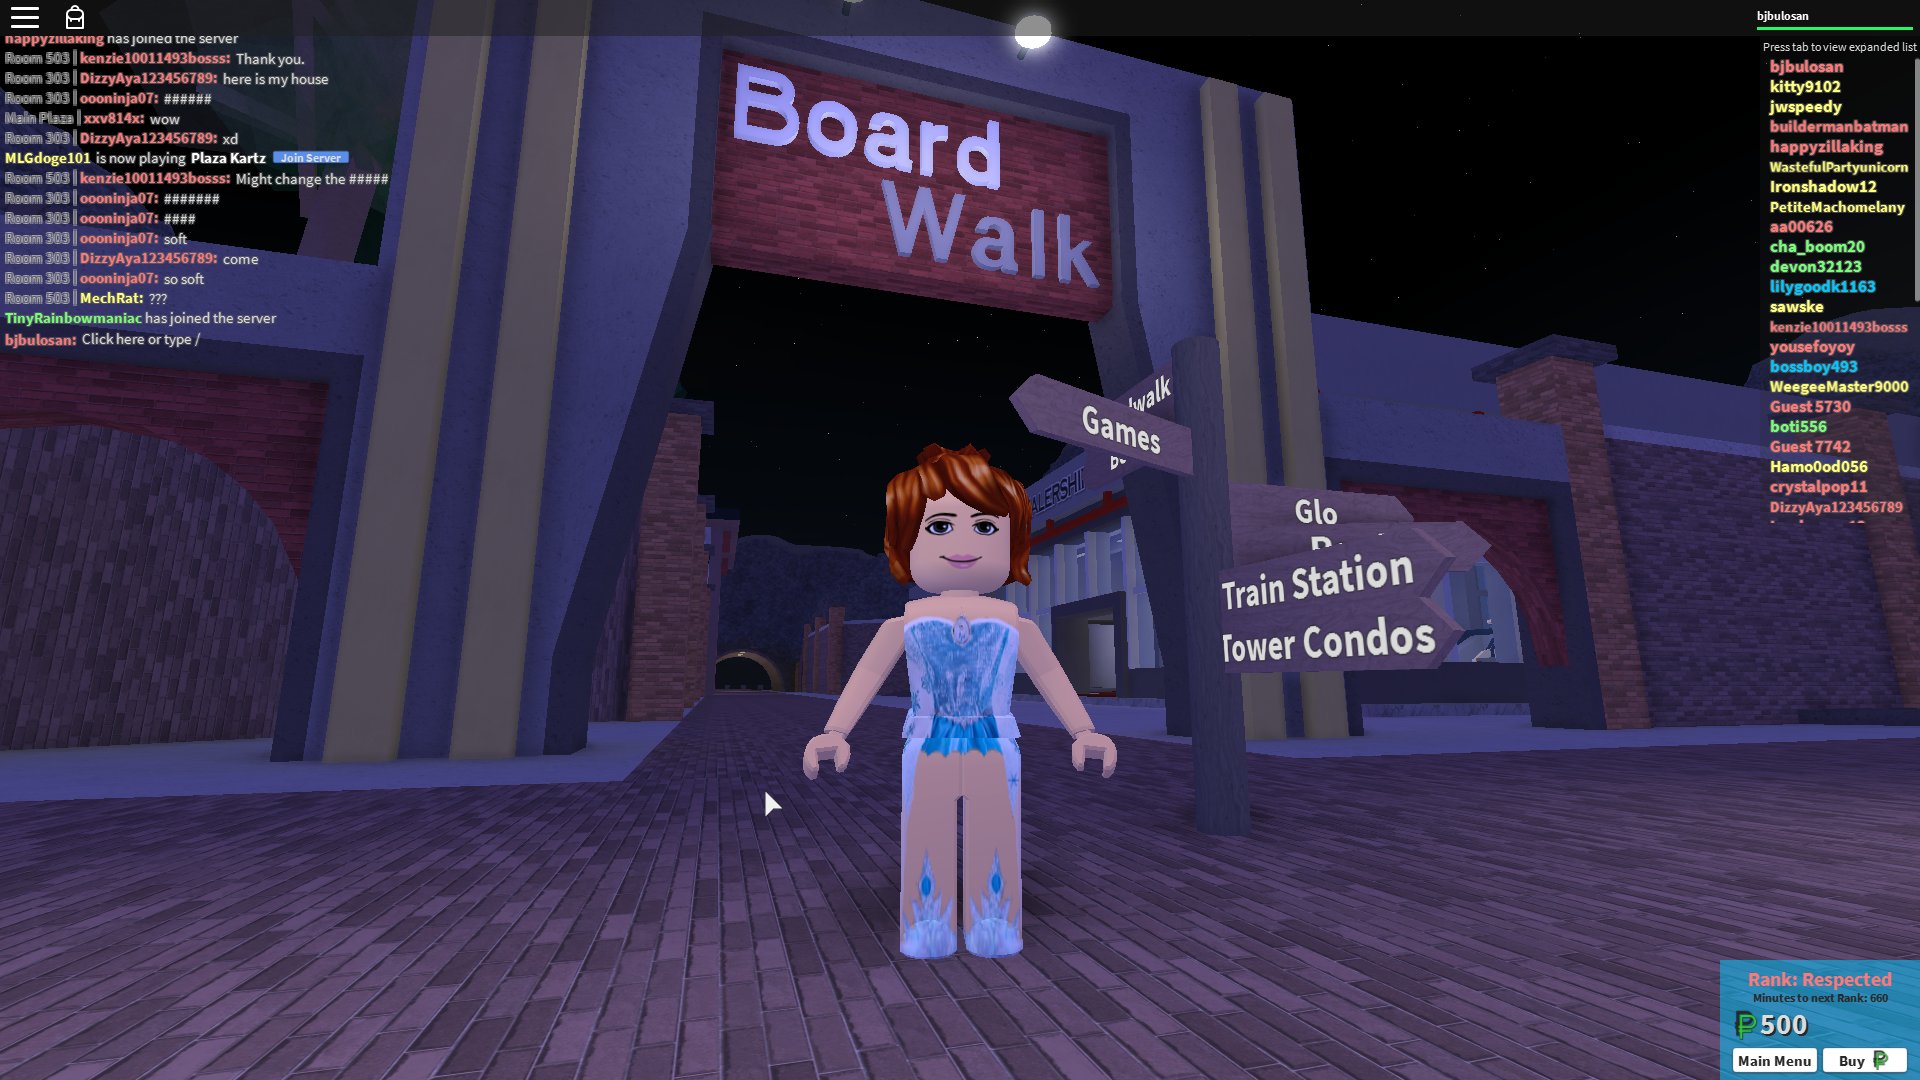 Bj Bulosan On Twitter Playing Roblox The Plaza I Am Shopping In - roblox the plaza super condo tour